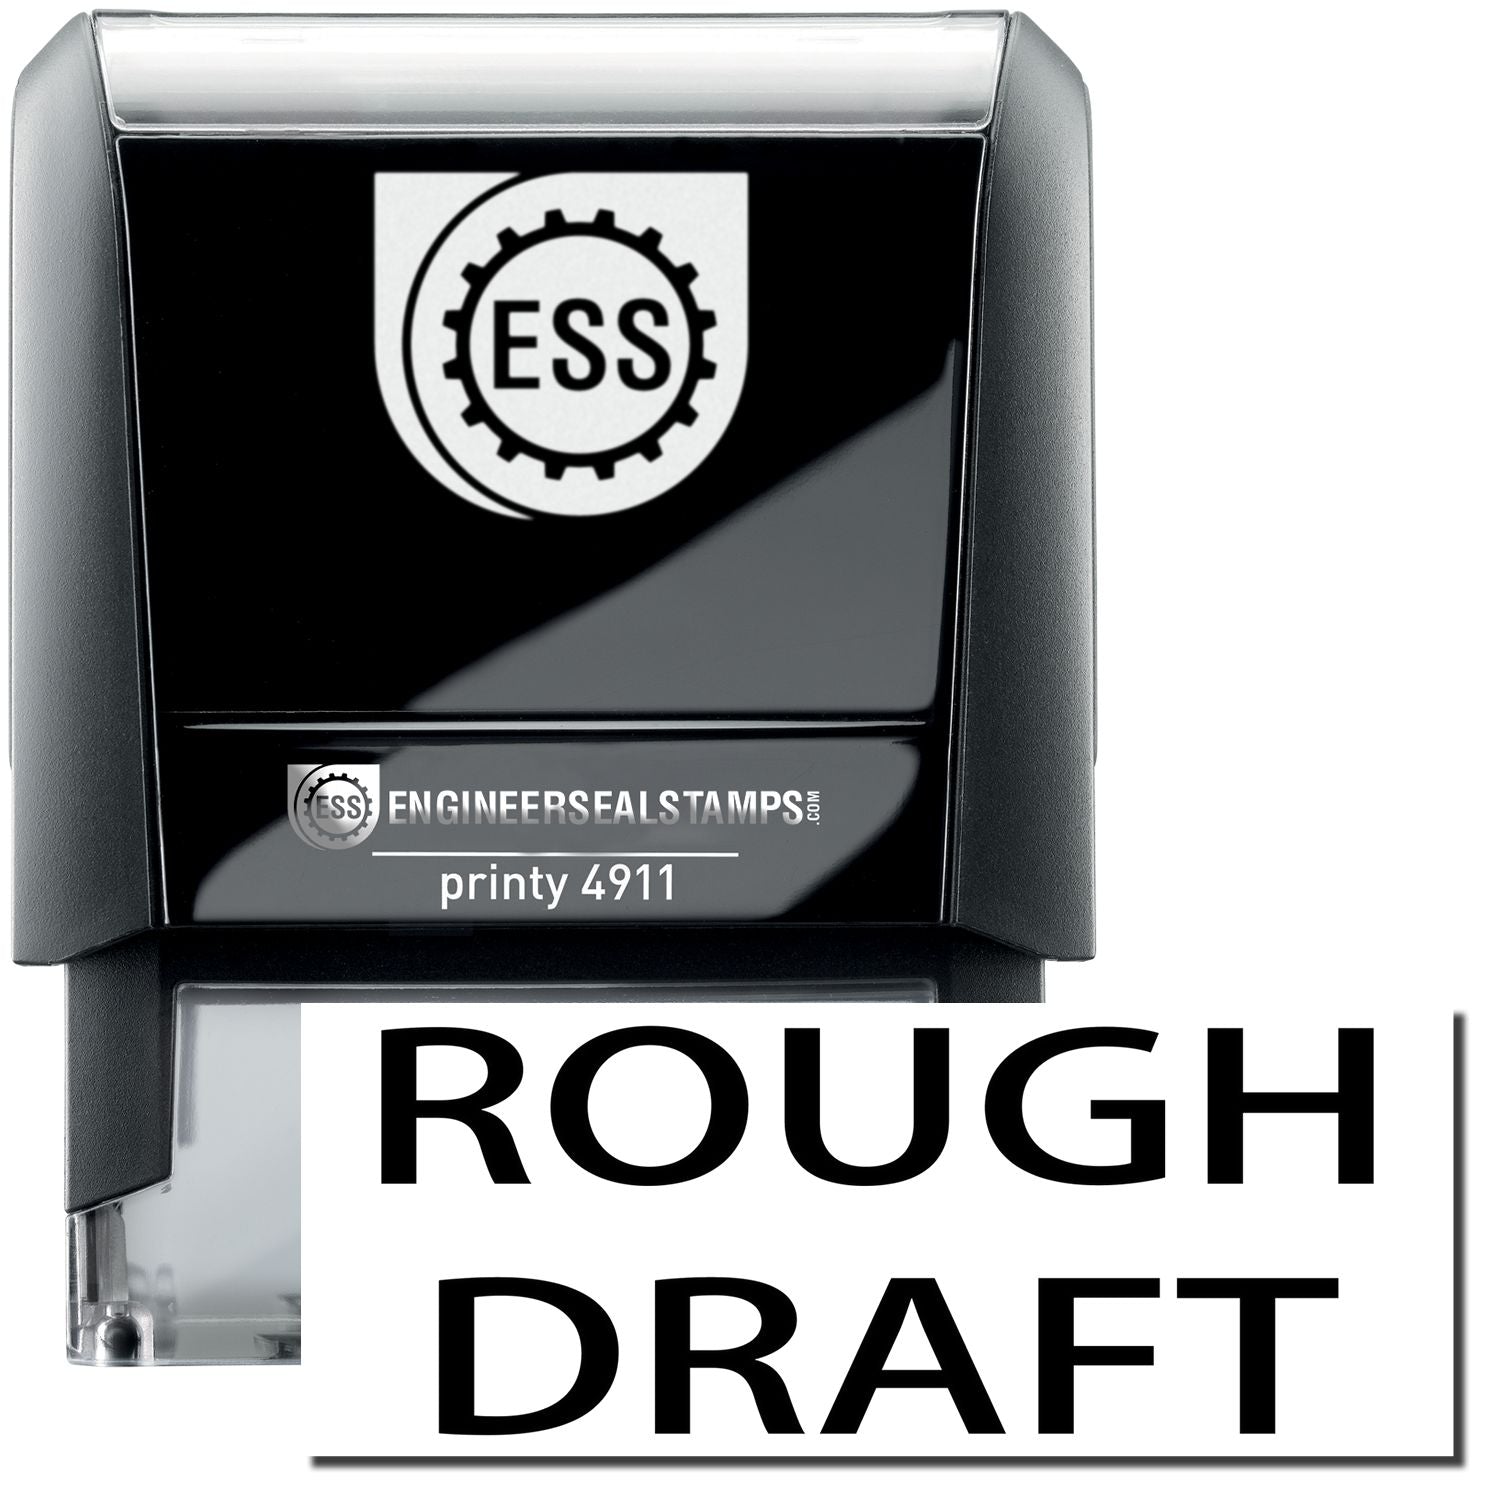 A self-inking stamp with a stamped image showing how the text "ROUGH DRAFT" is displayed after stamping.